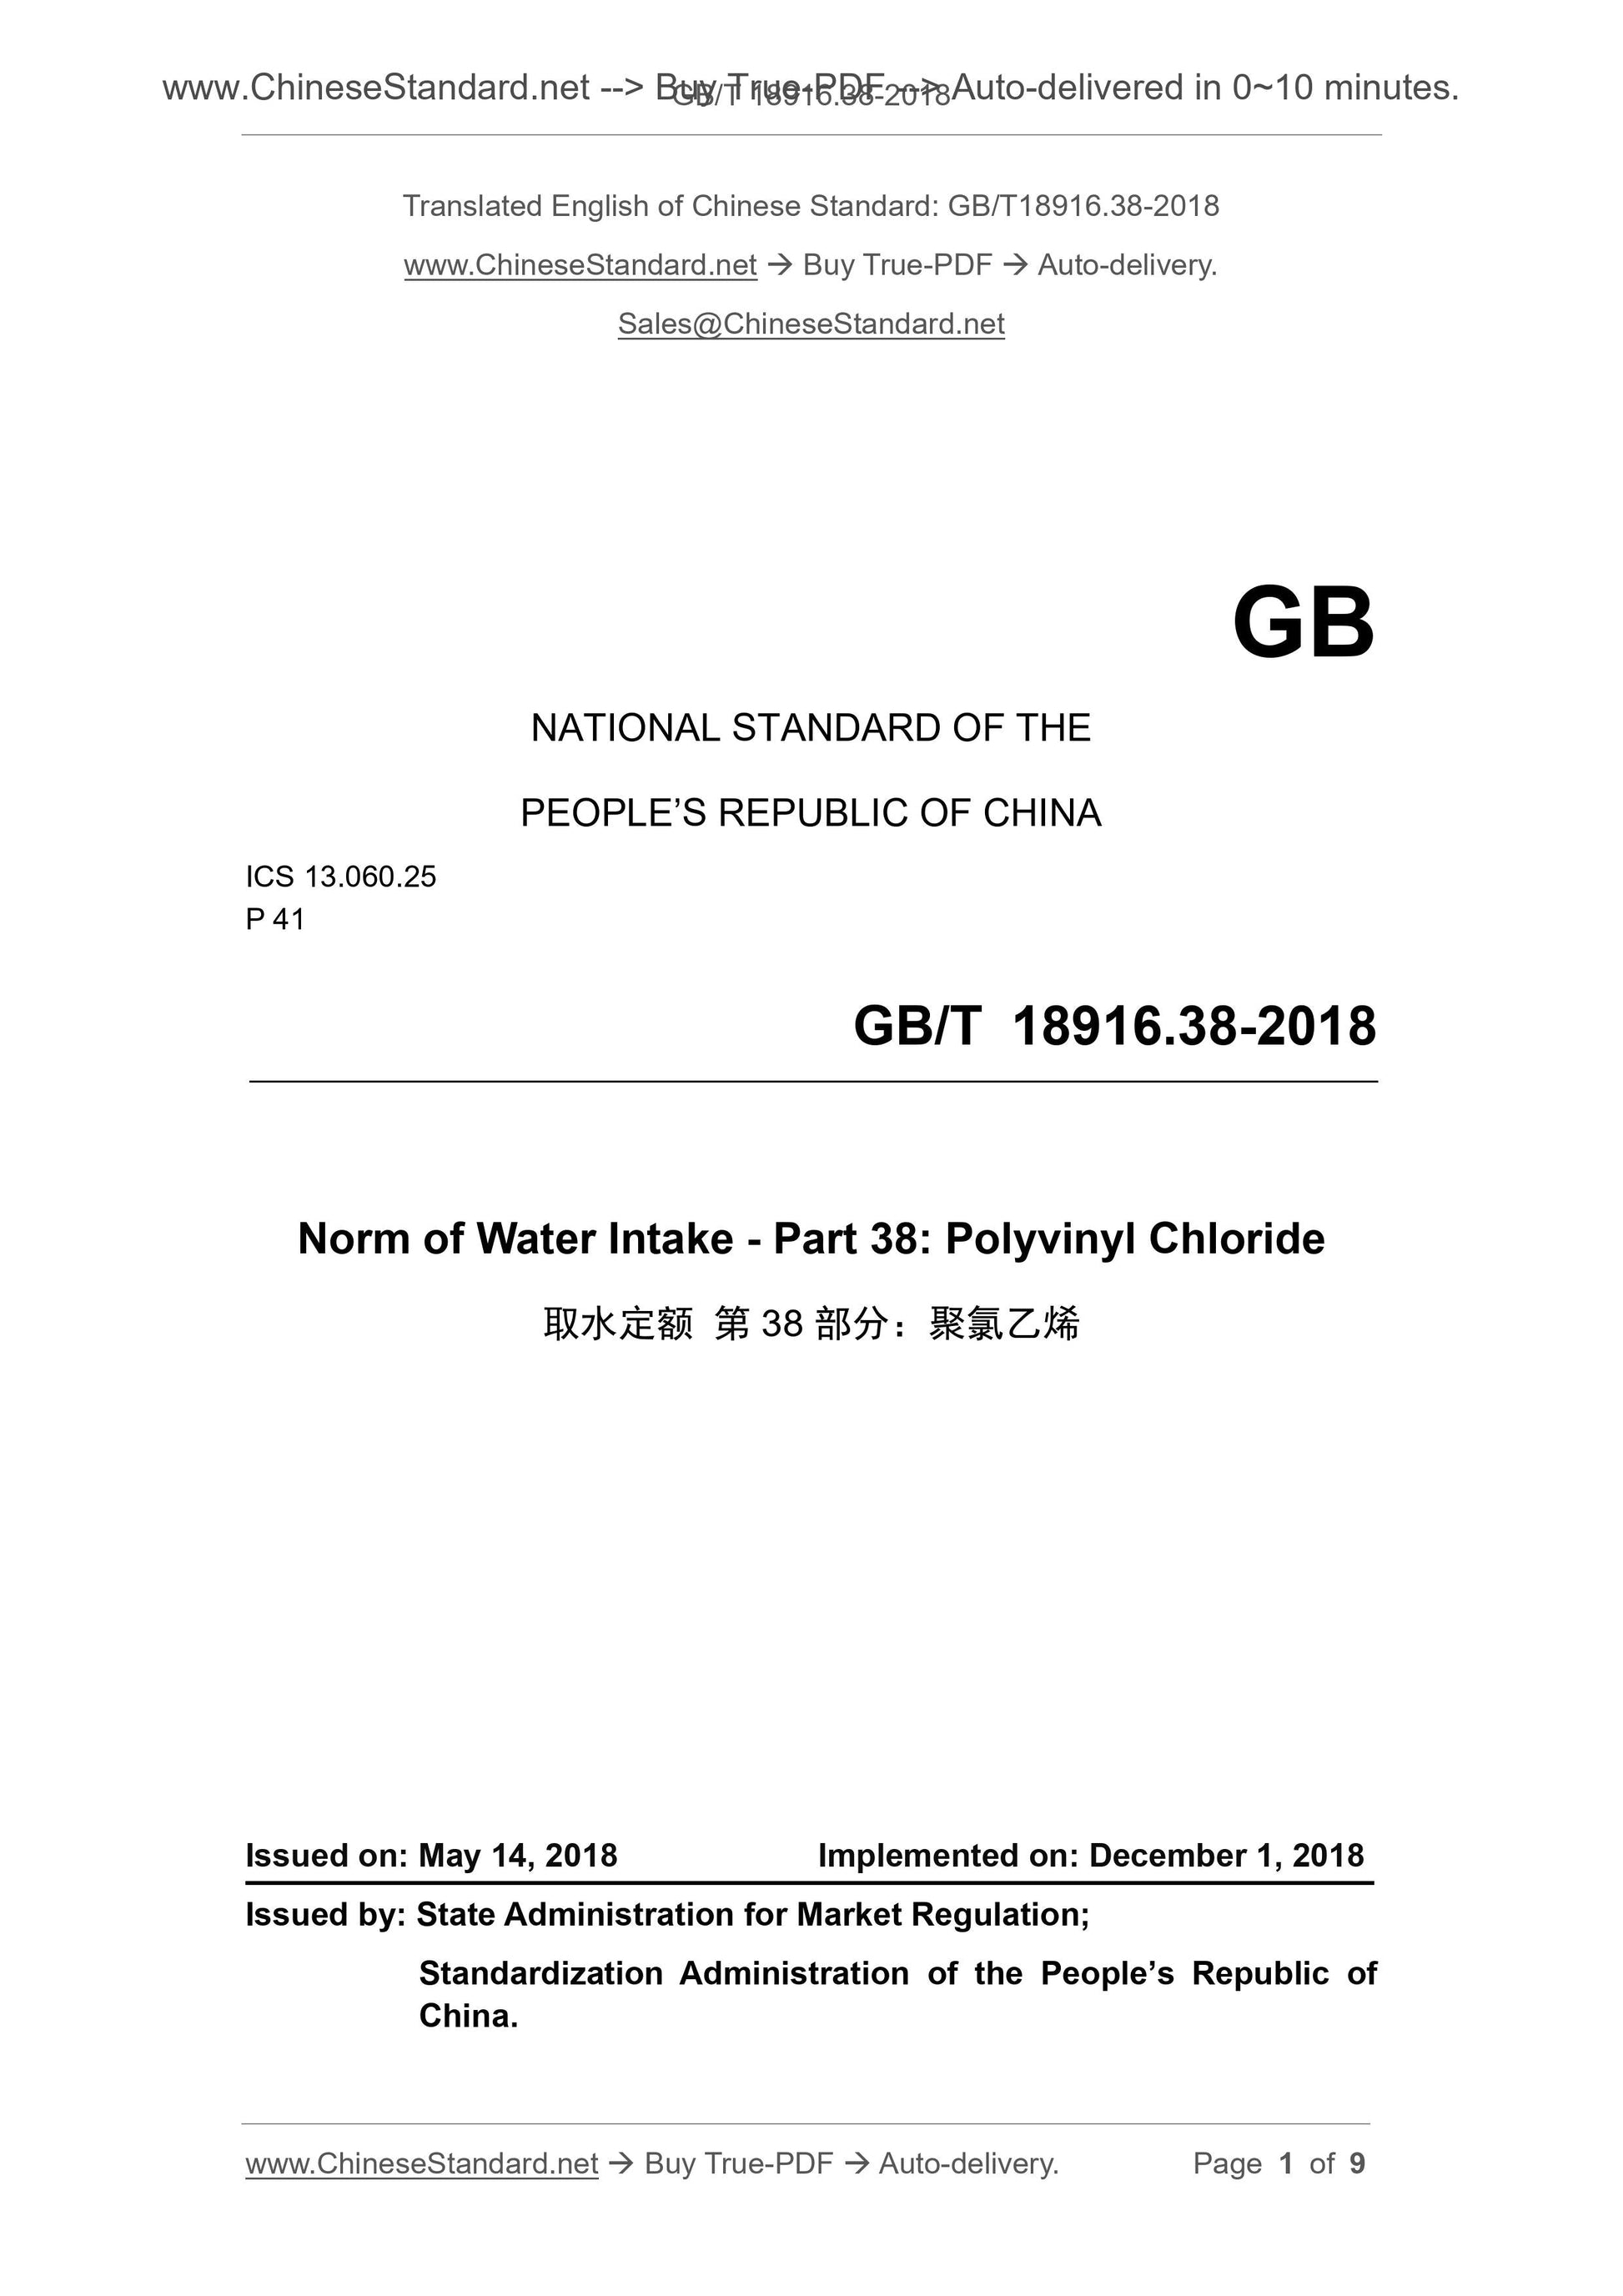 GB/T 18916.38-2018 Page 1